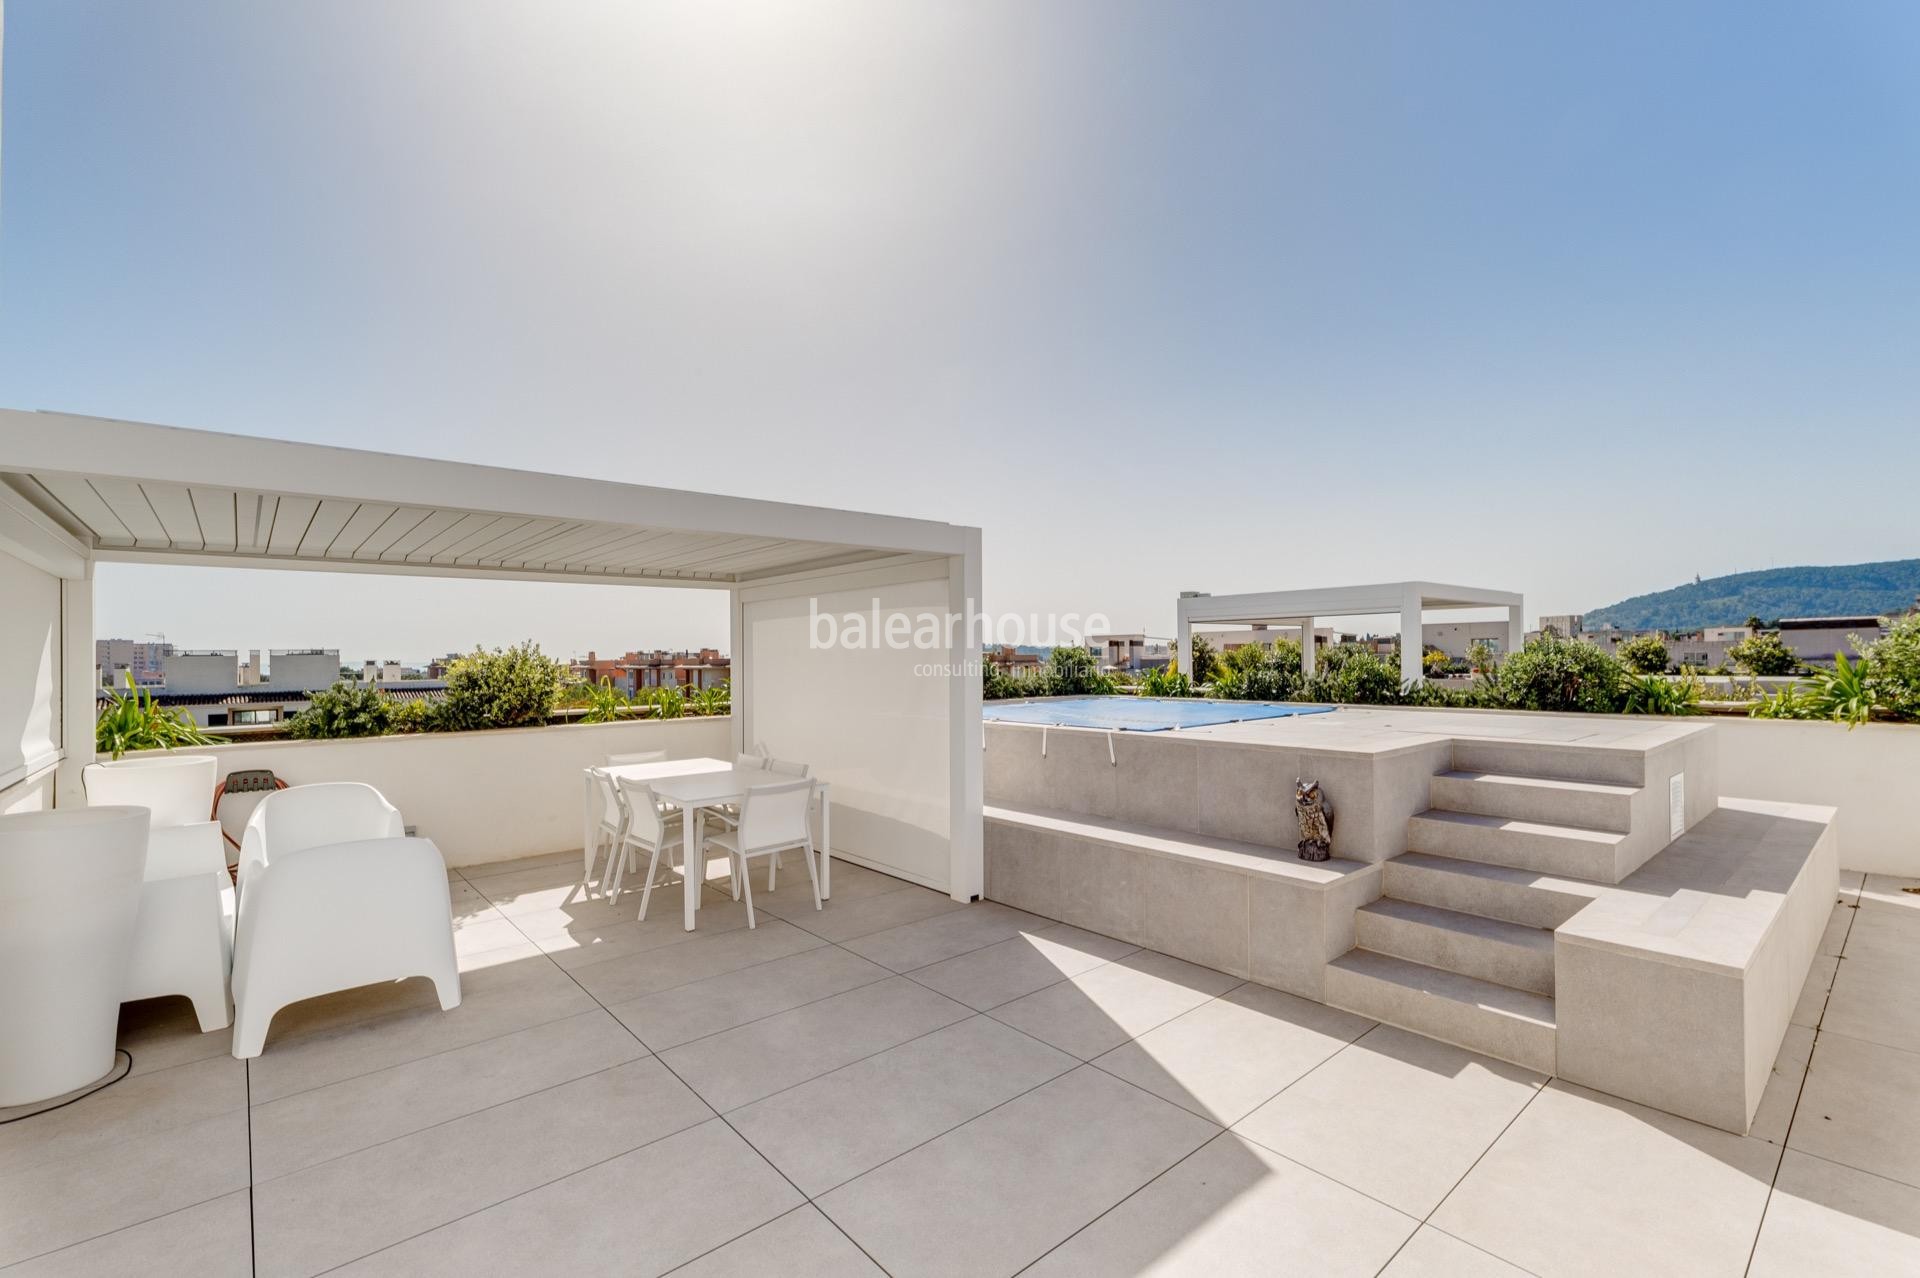 Excellent new south facing penthouse with solarium and private pool in the school area of Palma.